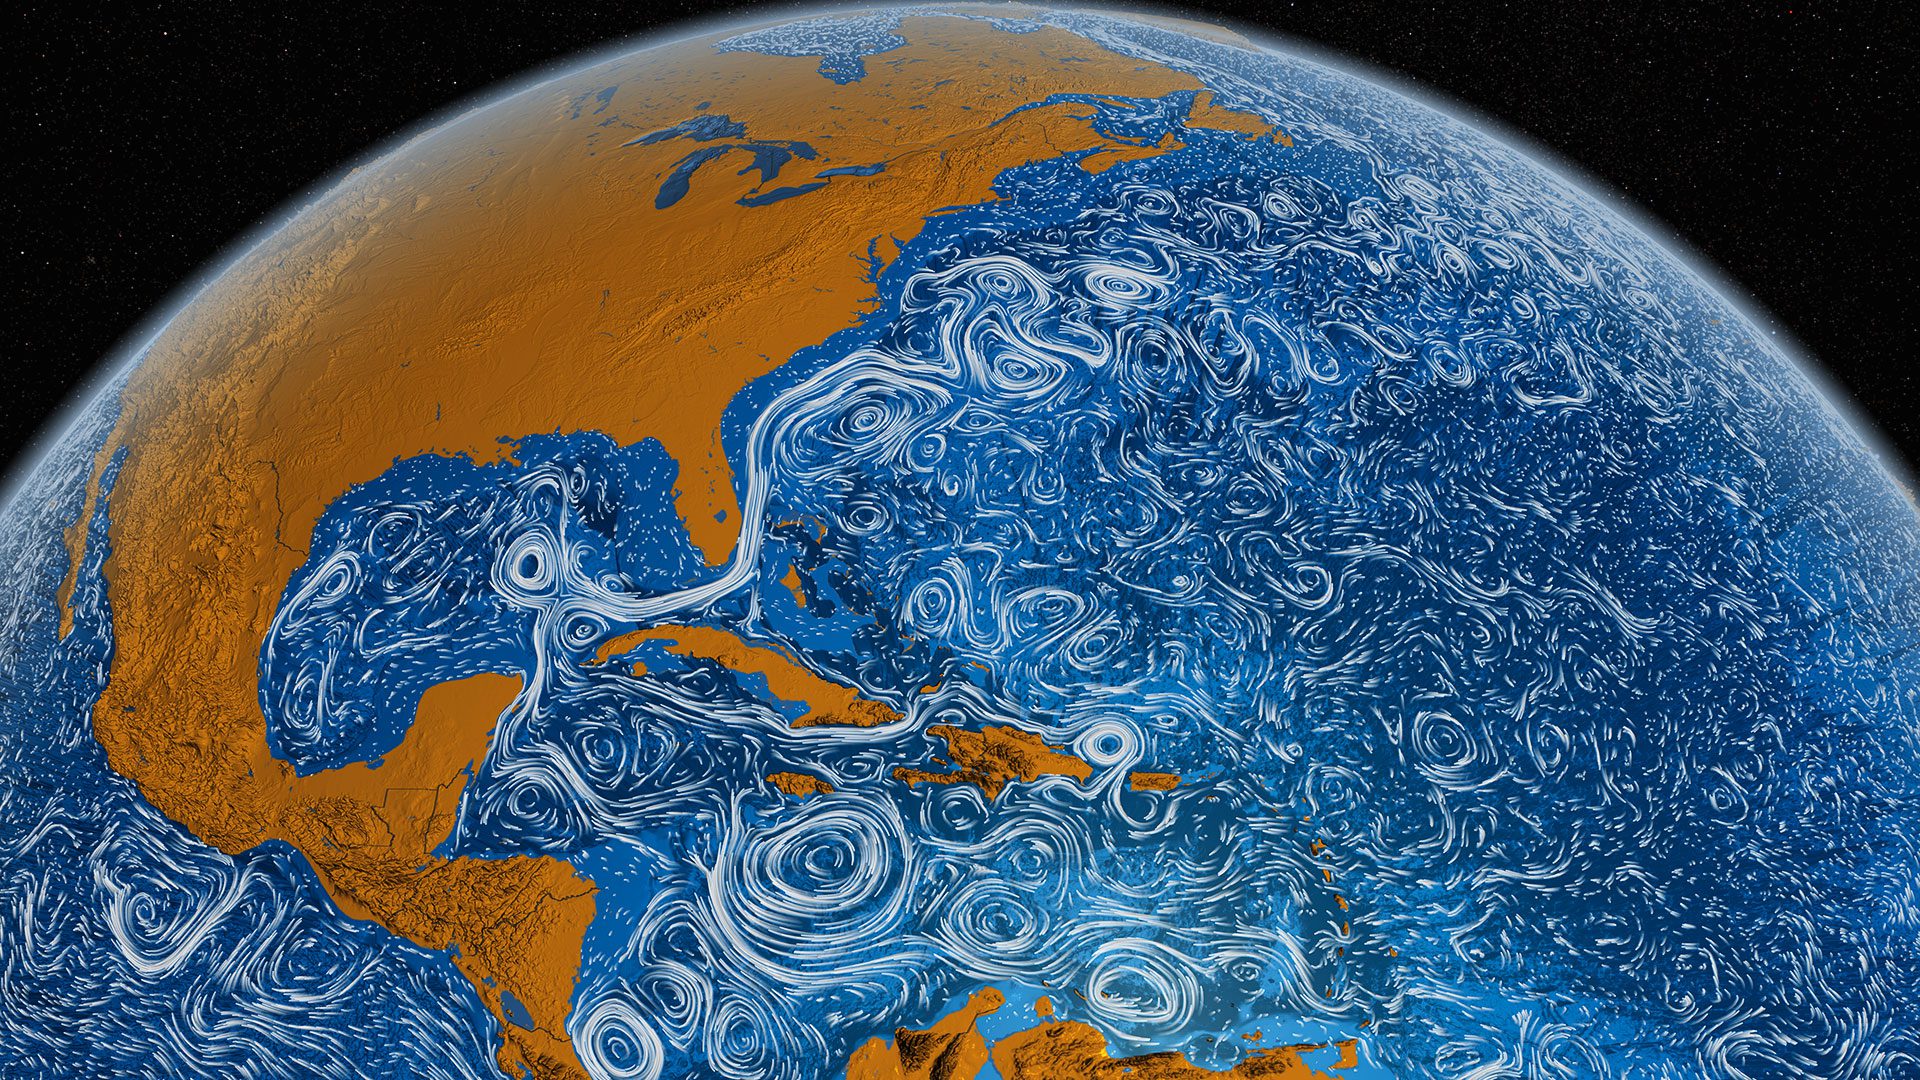 The Loop Current (encircled) runs from the tropics through the Caribbean and into the Gulf of Mexico, then joins the Gulf Stream moving up the East Coast. (Graphic courtesy of NASA/Goddard Space Flight Center Scientific Visualization Studio)